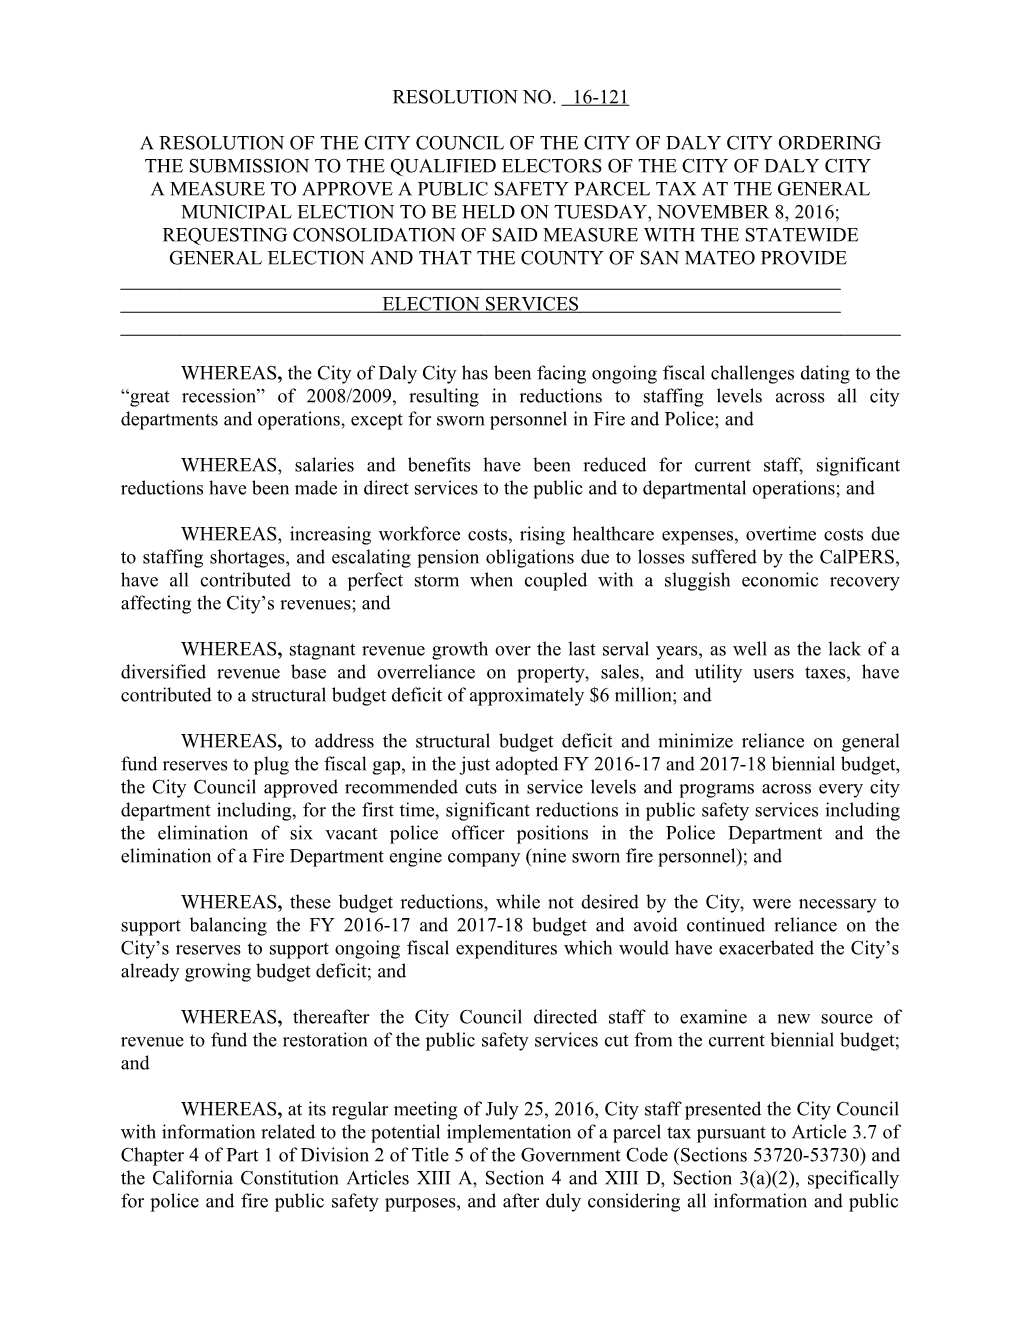 Planning Commission Resolution PC 01